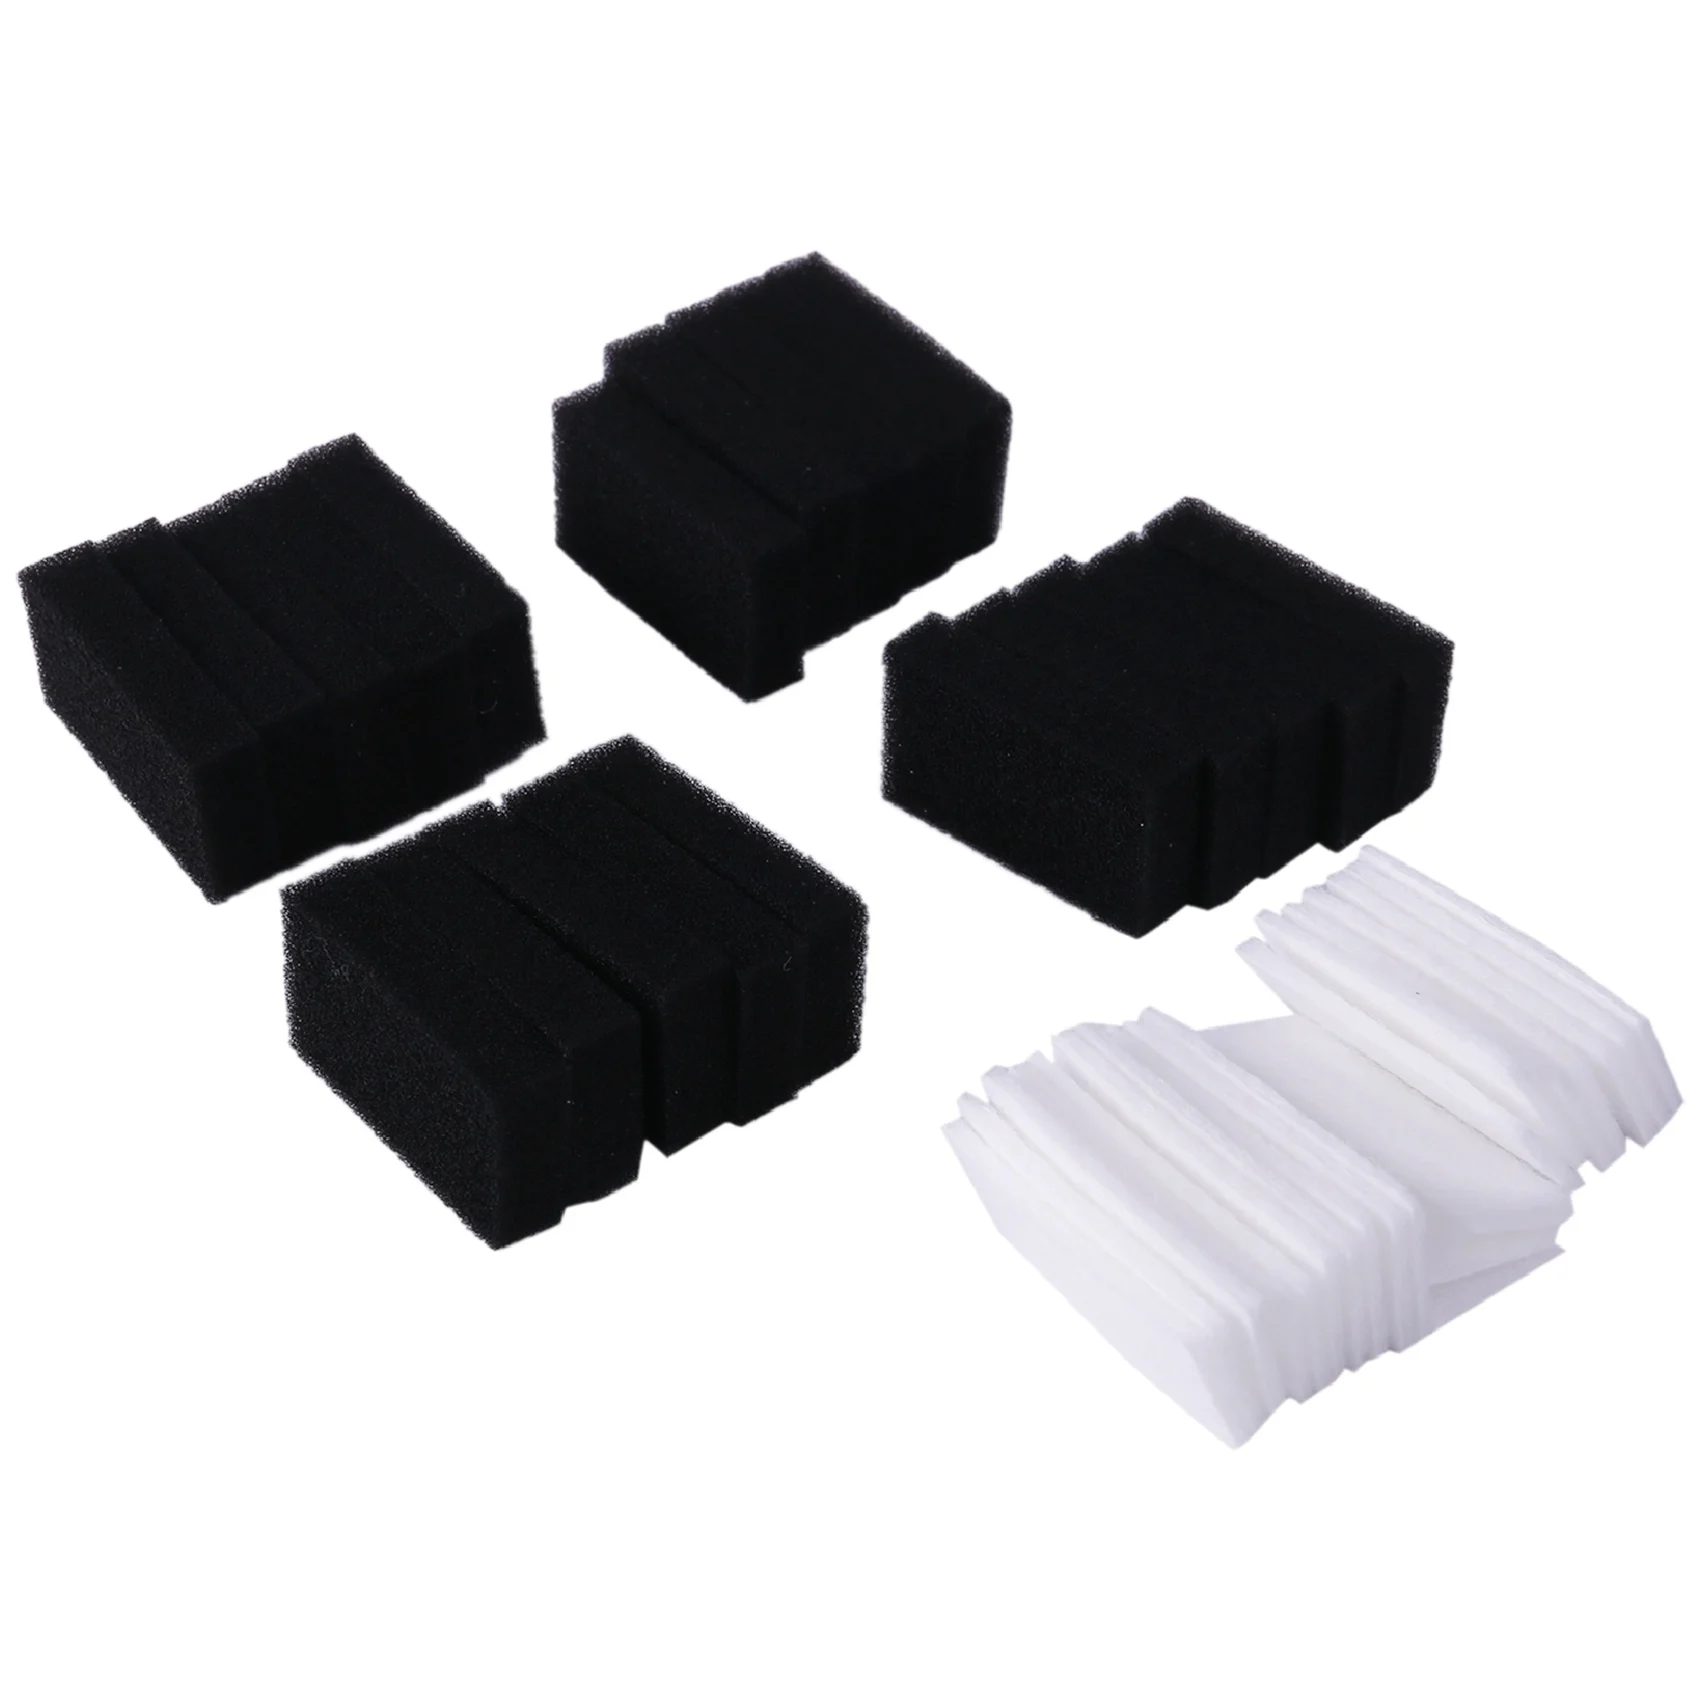 CPAP Filters - Foam Filter and Ultra Fine Filters - Suitable for Philips Ventilator - 40Pcs